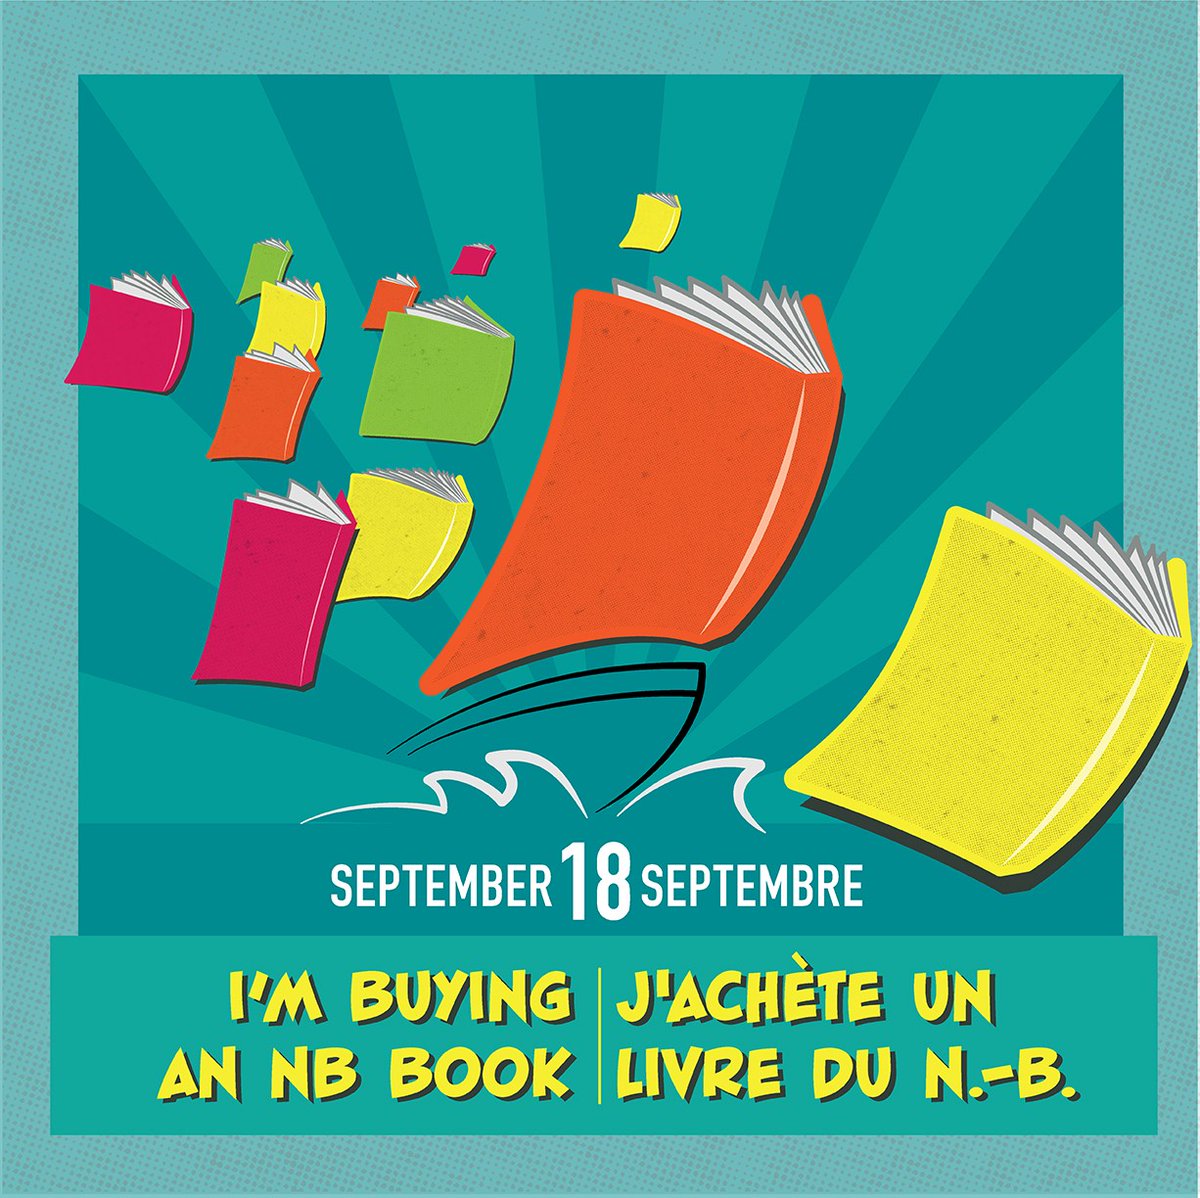 📚🎉 Today is I'm buying a NB Book Day! Go to your favorite book store or shop online, but don't forget to support our local authors. We can't wait to see which books you'll choose. bit.ly/3BHjccj #September18 #myNBbooks #IReadLocal